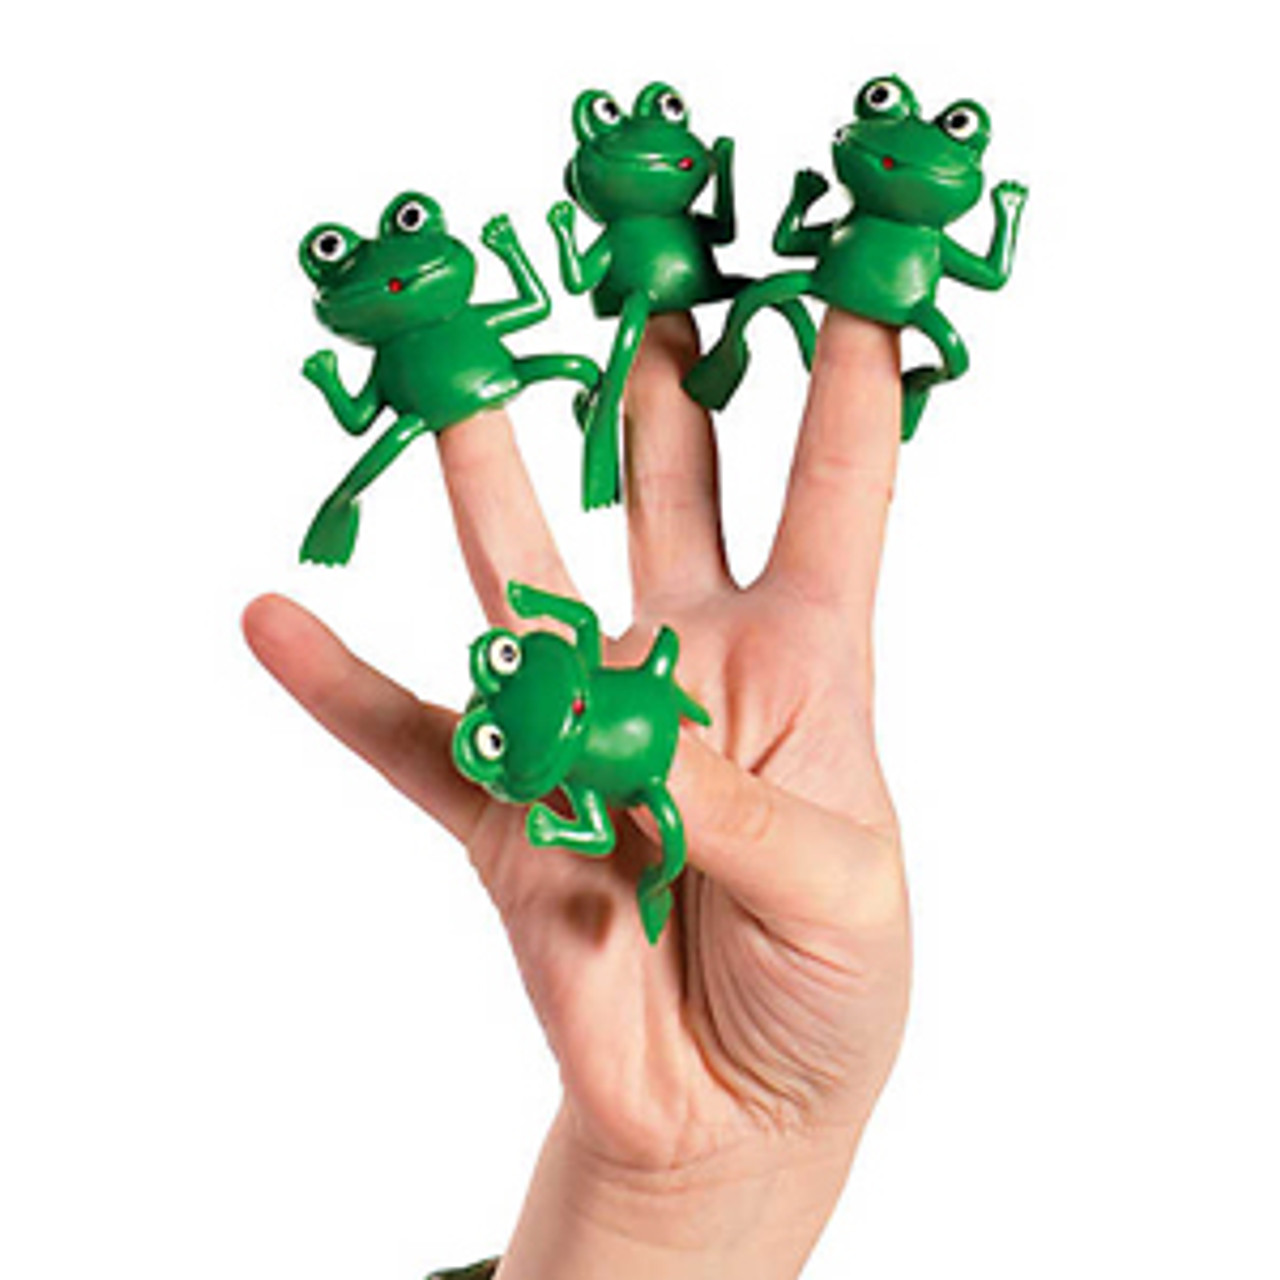 https://cdn11.bigcommerce.com/s-am7z9yxxh2/images/stencil/1280x1280/products/5904/7541/FUN121-frog-finger-puppets-i__52080__91958.1587570668.jpg?c=1?imbypass=on